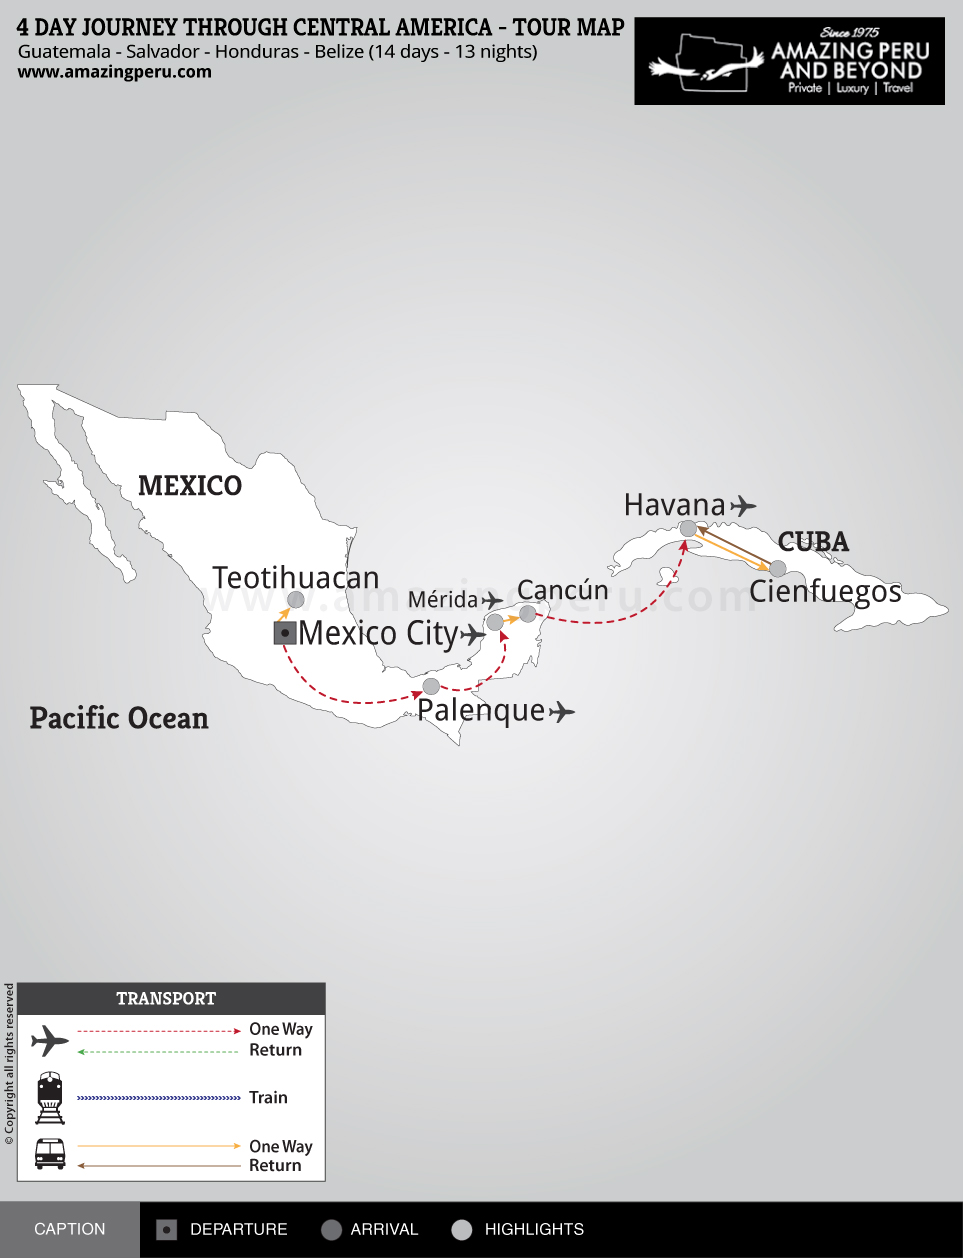 14 day Journey through Central America - 14 days / 13 nights.